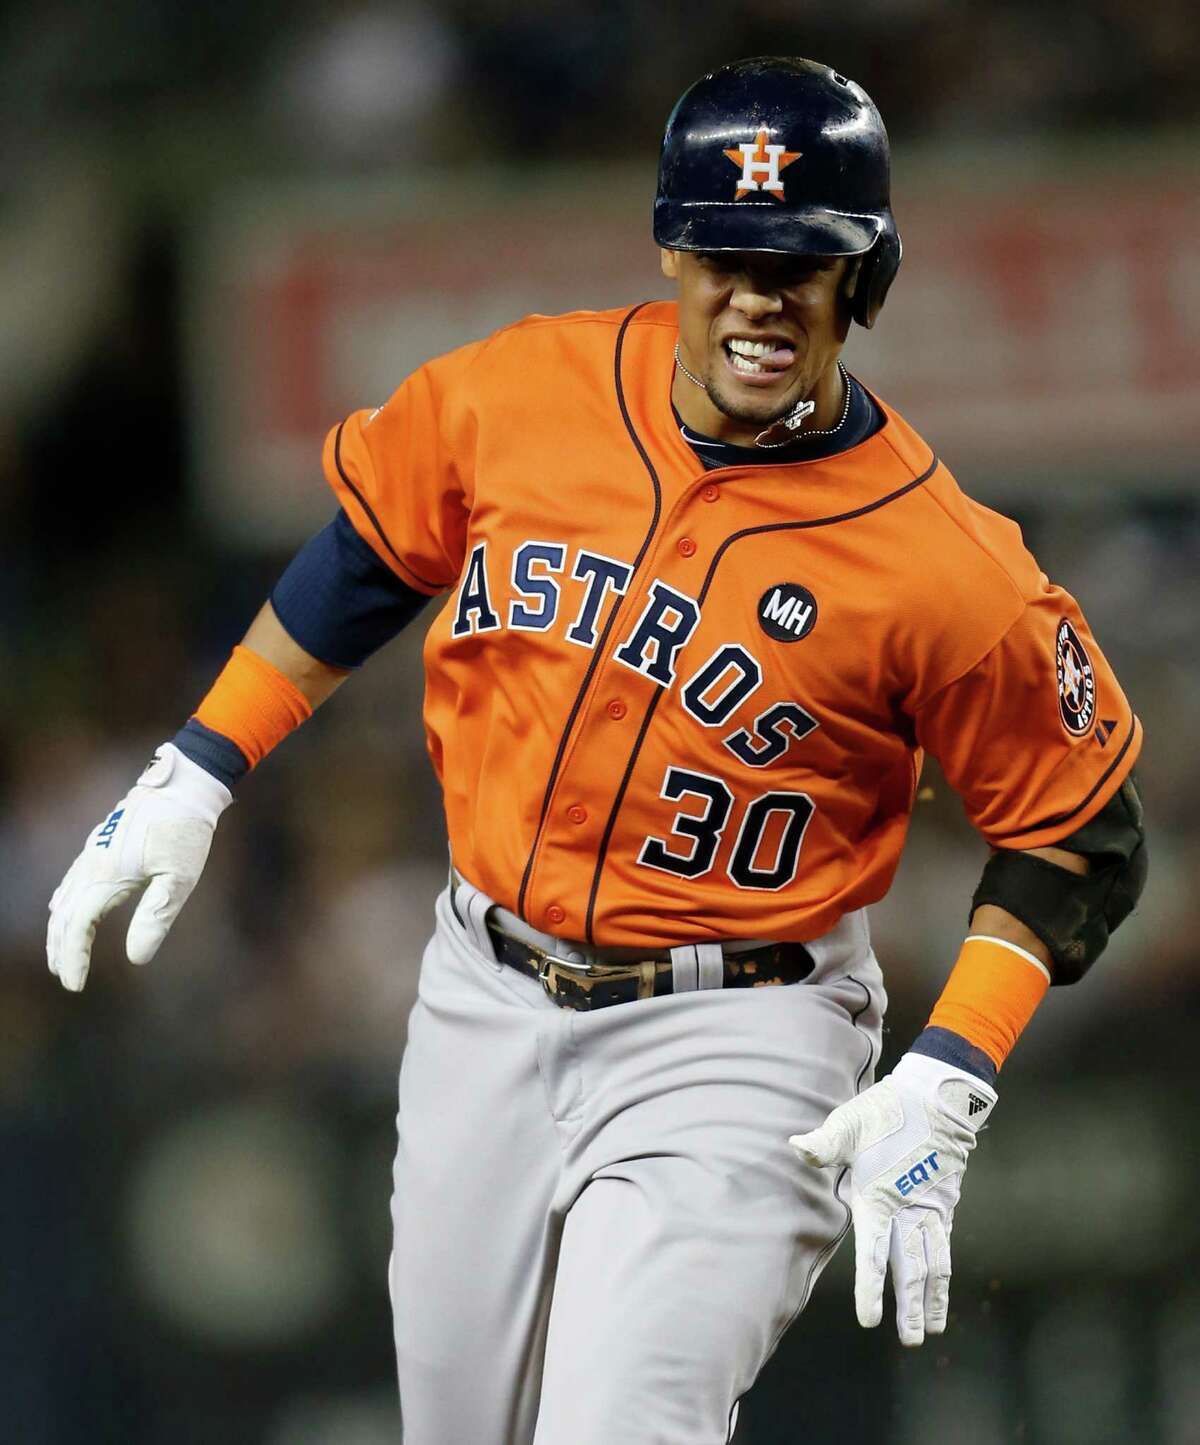 Carlos Gomez knows he's a disappointment to Astros fans